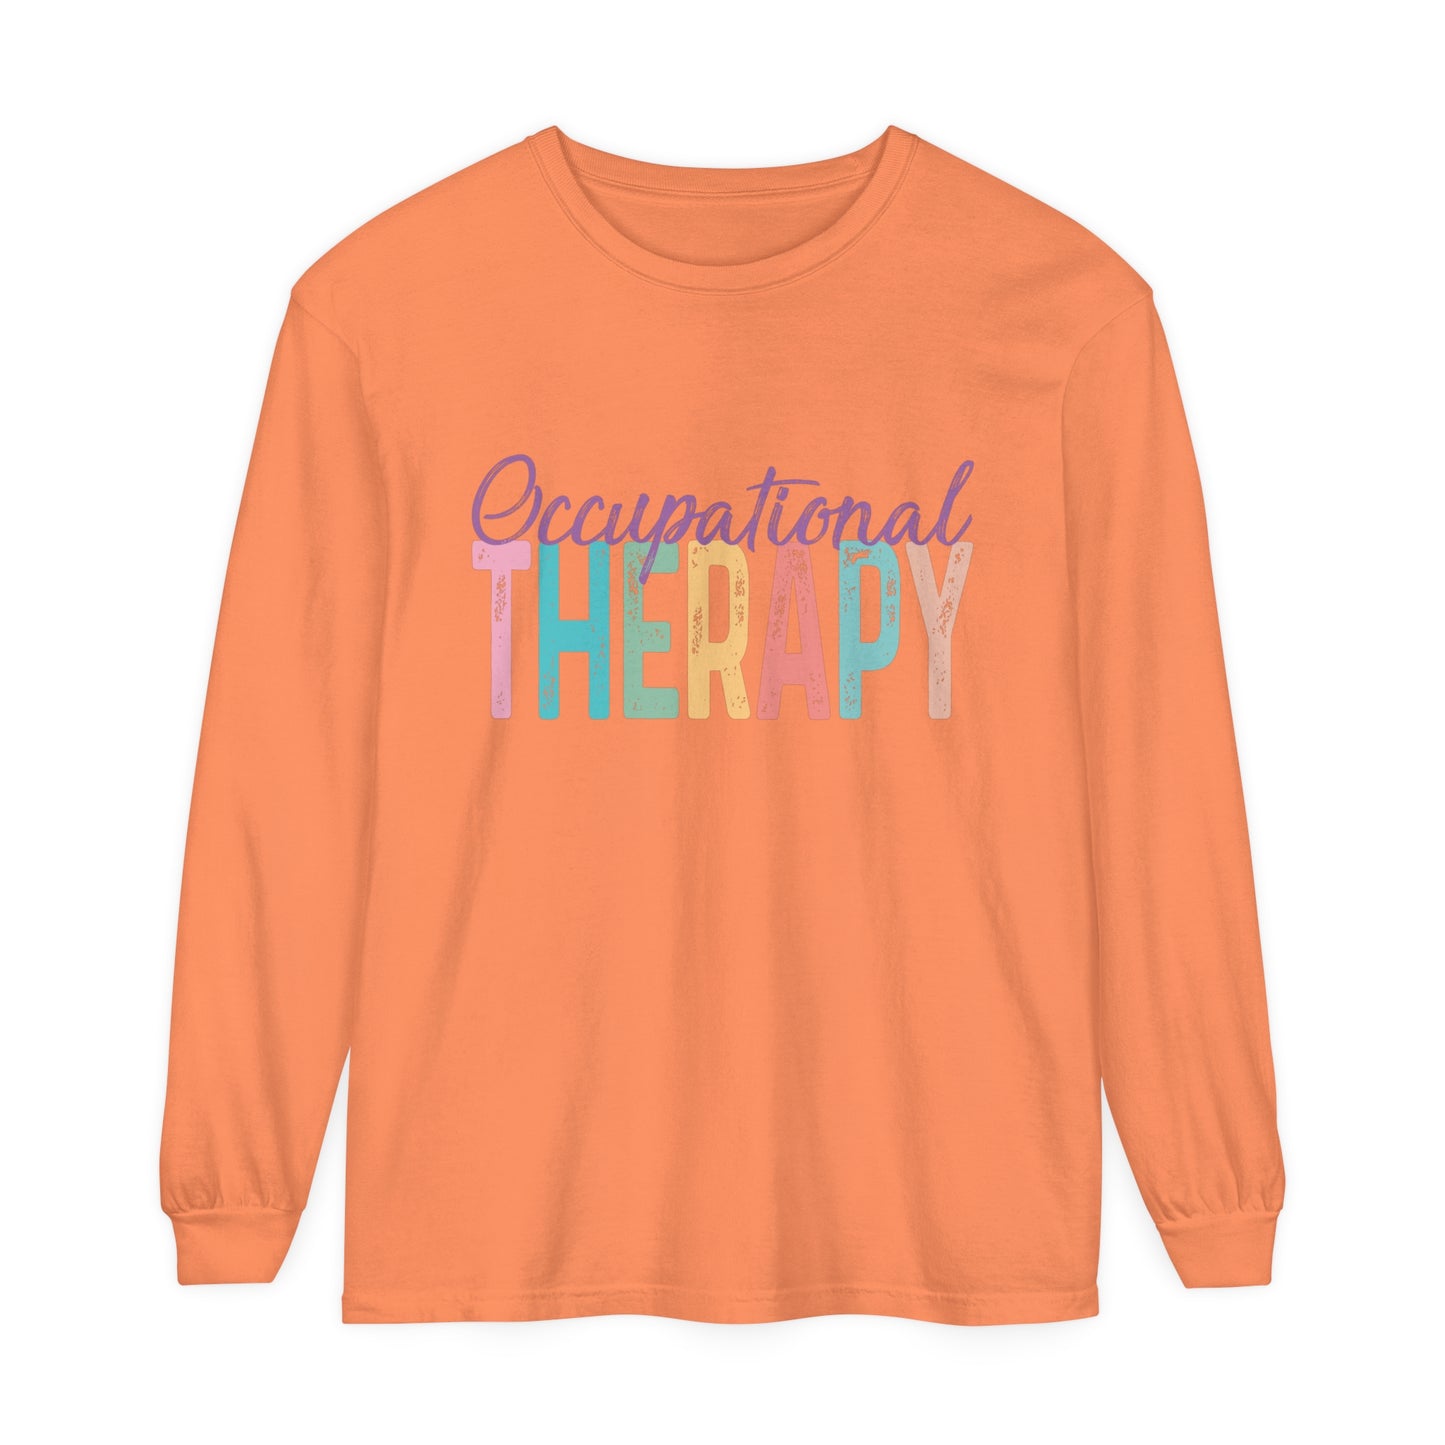 Occupational Therapy OT Long Sleeve T-Shirt